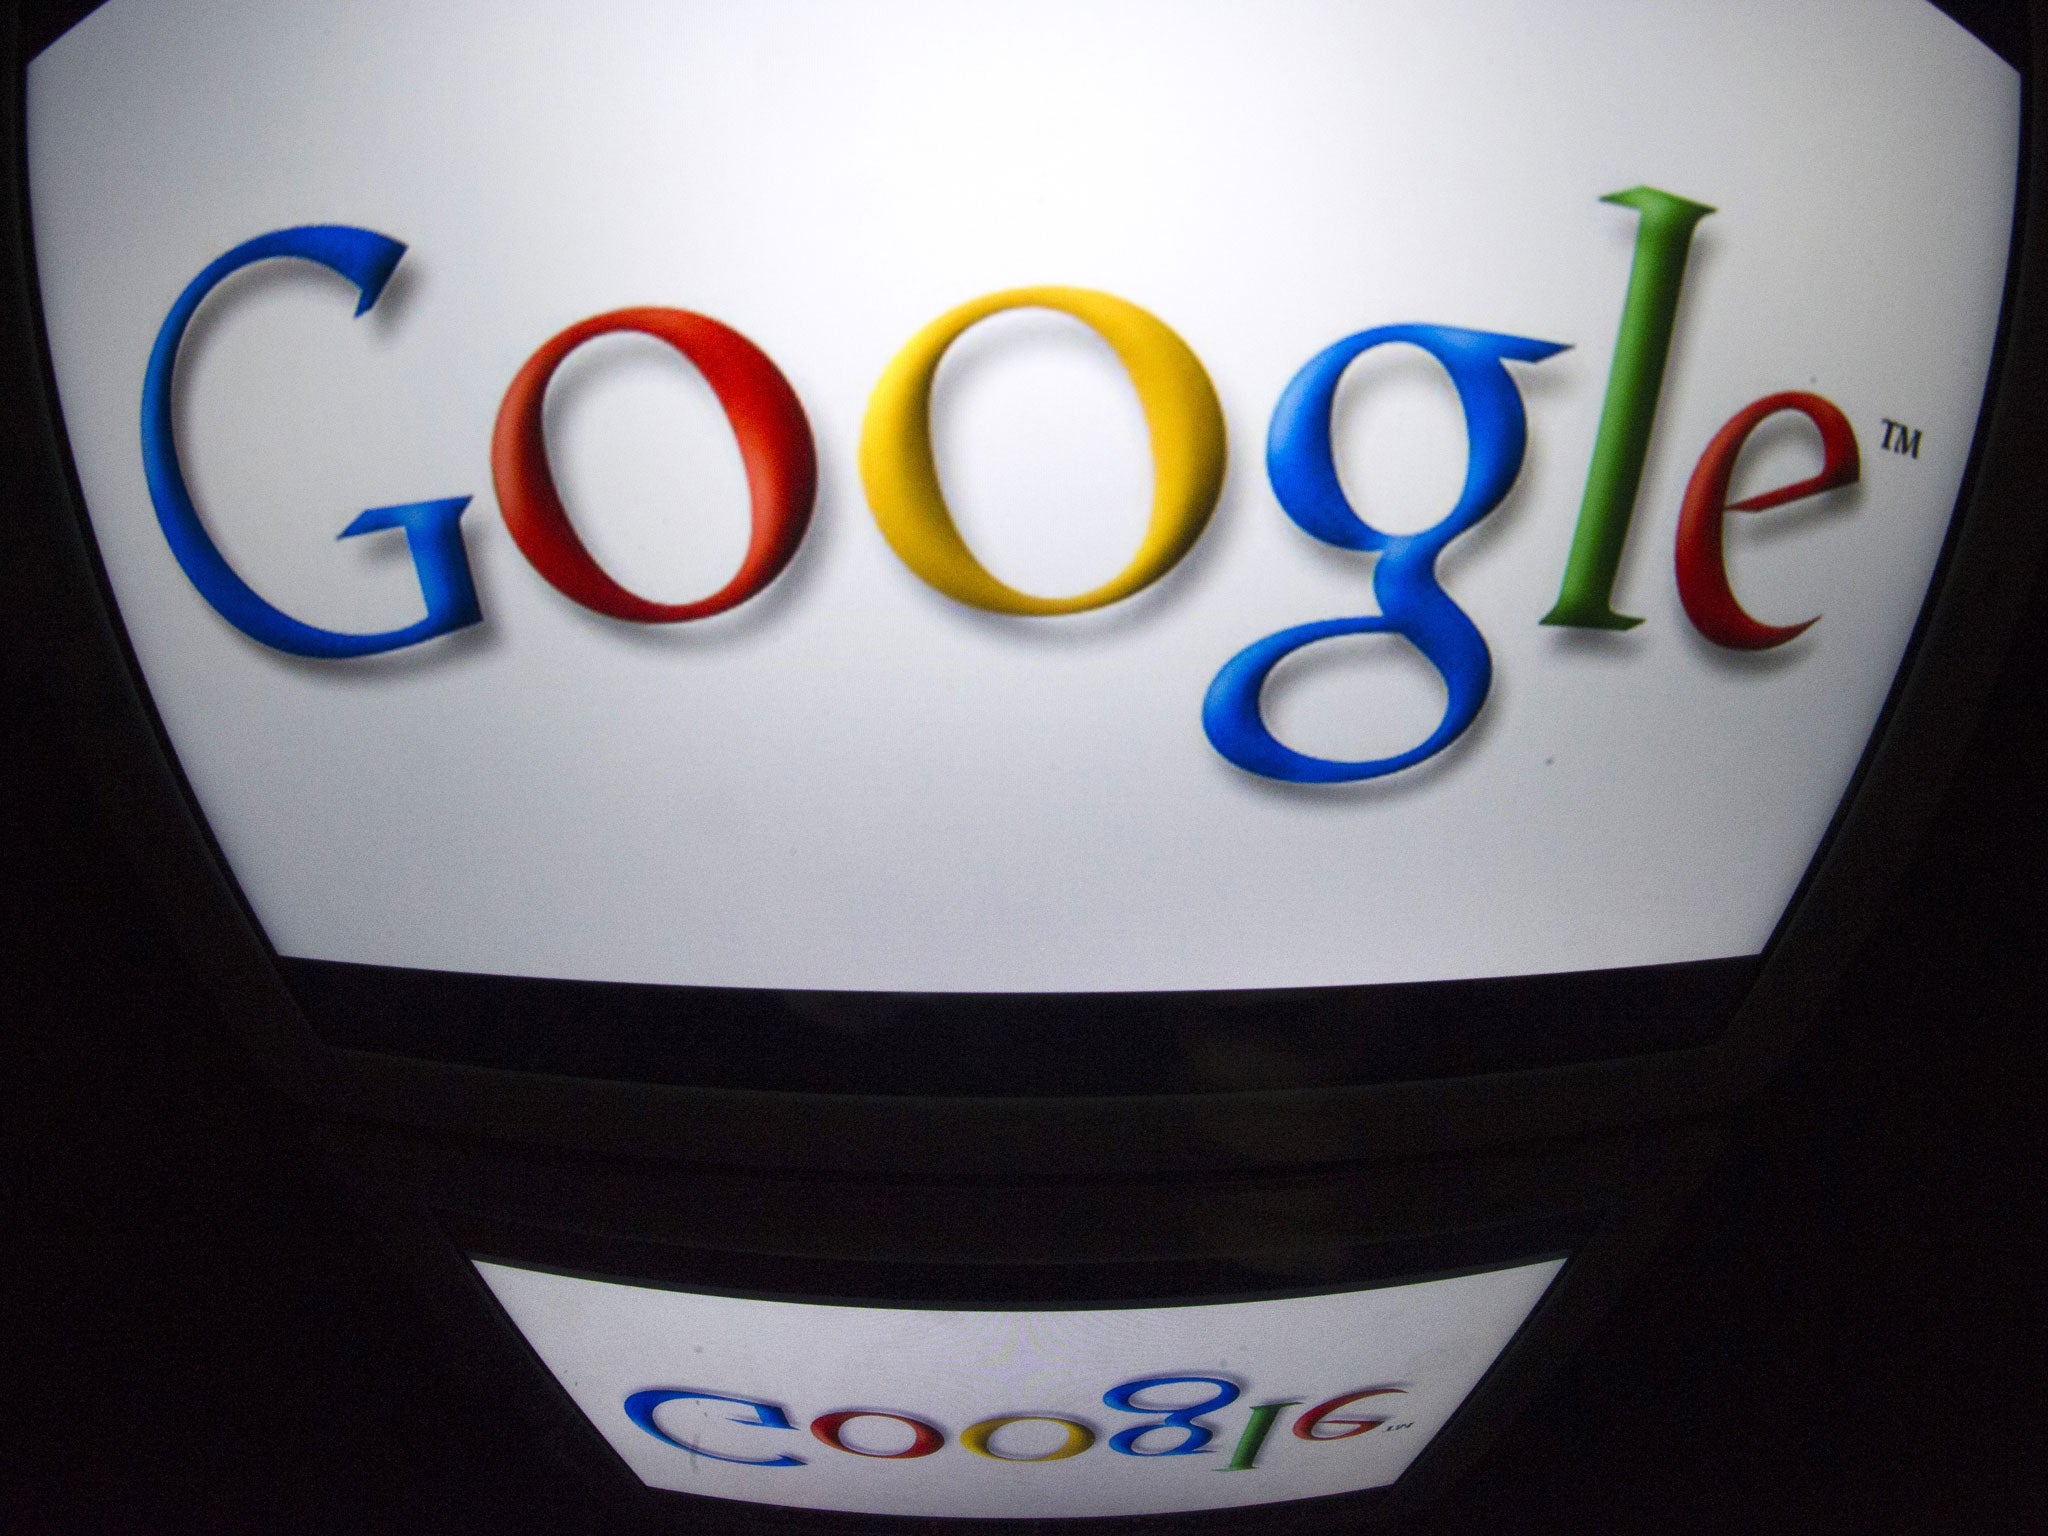 Google is to change its name to Alphabet, alongside a major restructuring